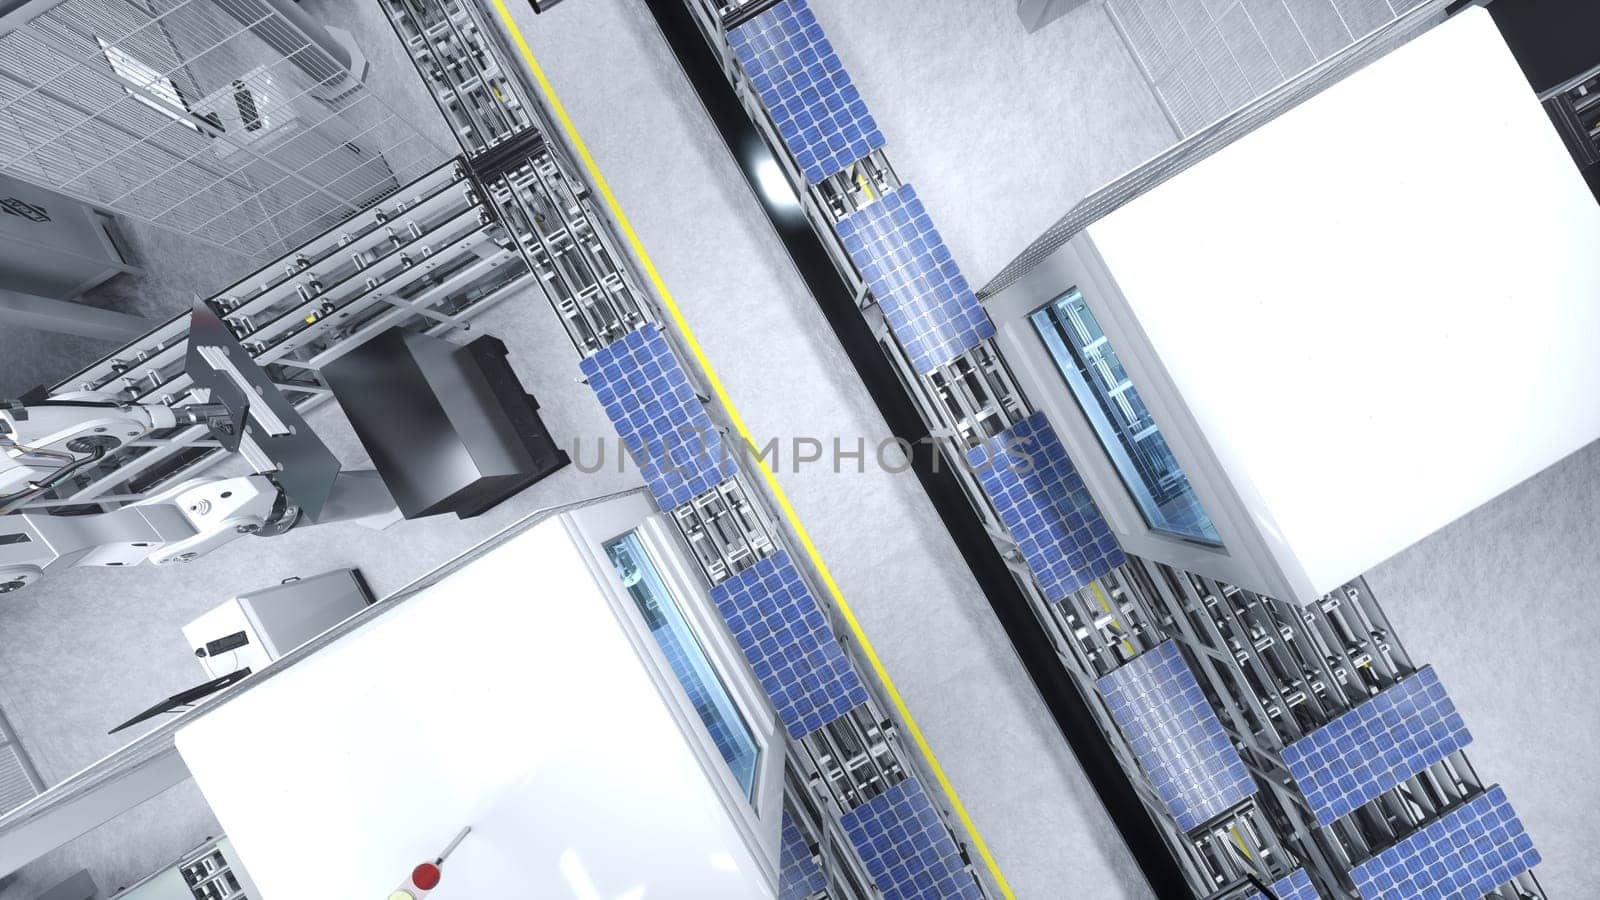 Aerial shot of warehouse producing green energy solar cells, 3D illustration by DCStudio